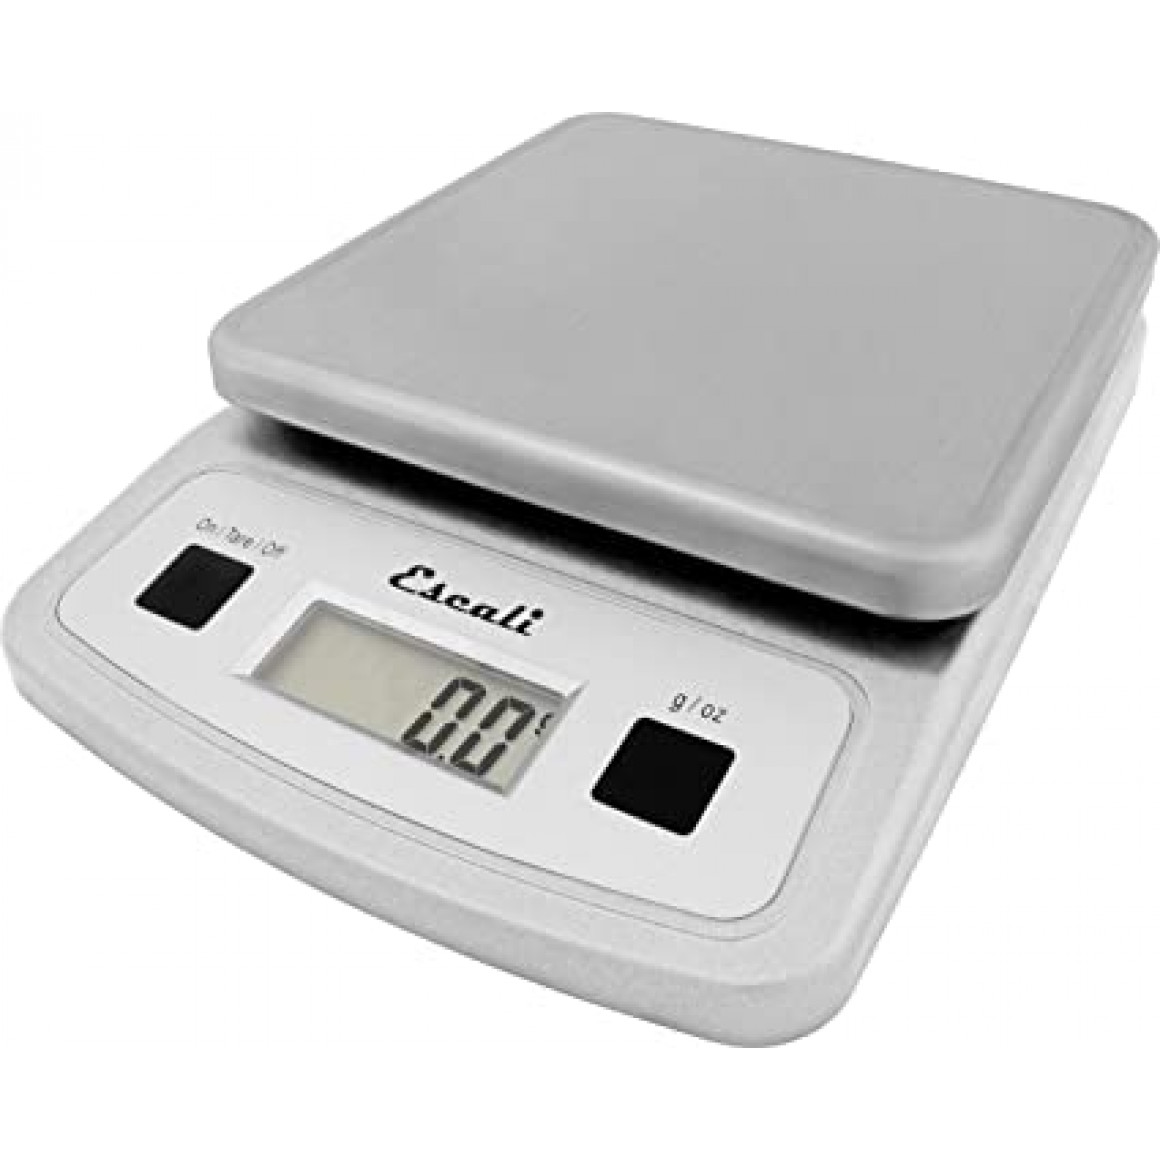 Low-Profile Digital Kitchen Scale, 13 Lb / 6 Kg - Silver-Gray (Optional power adapter sold separatel